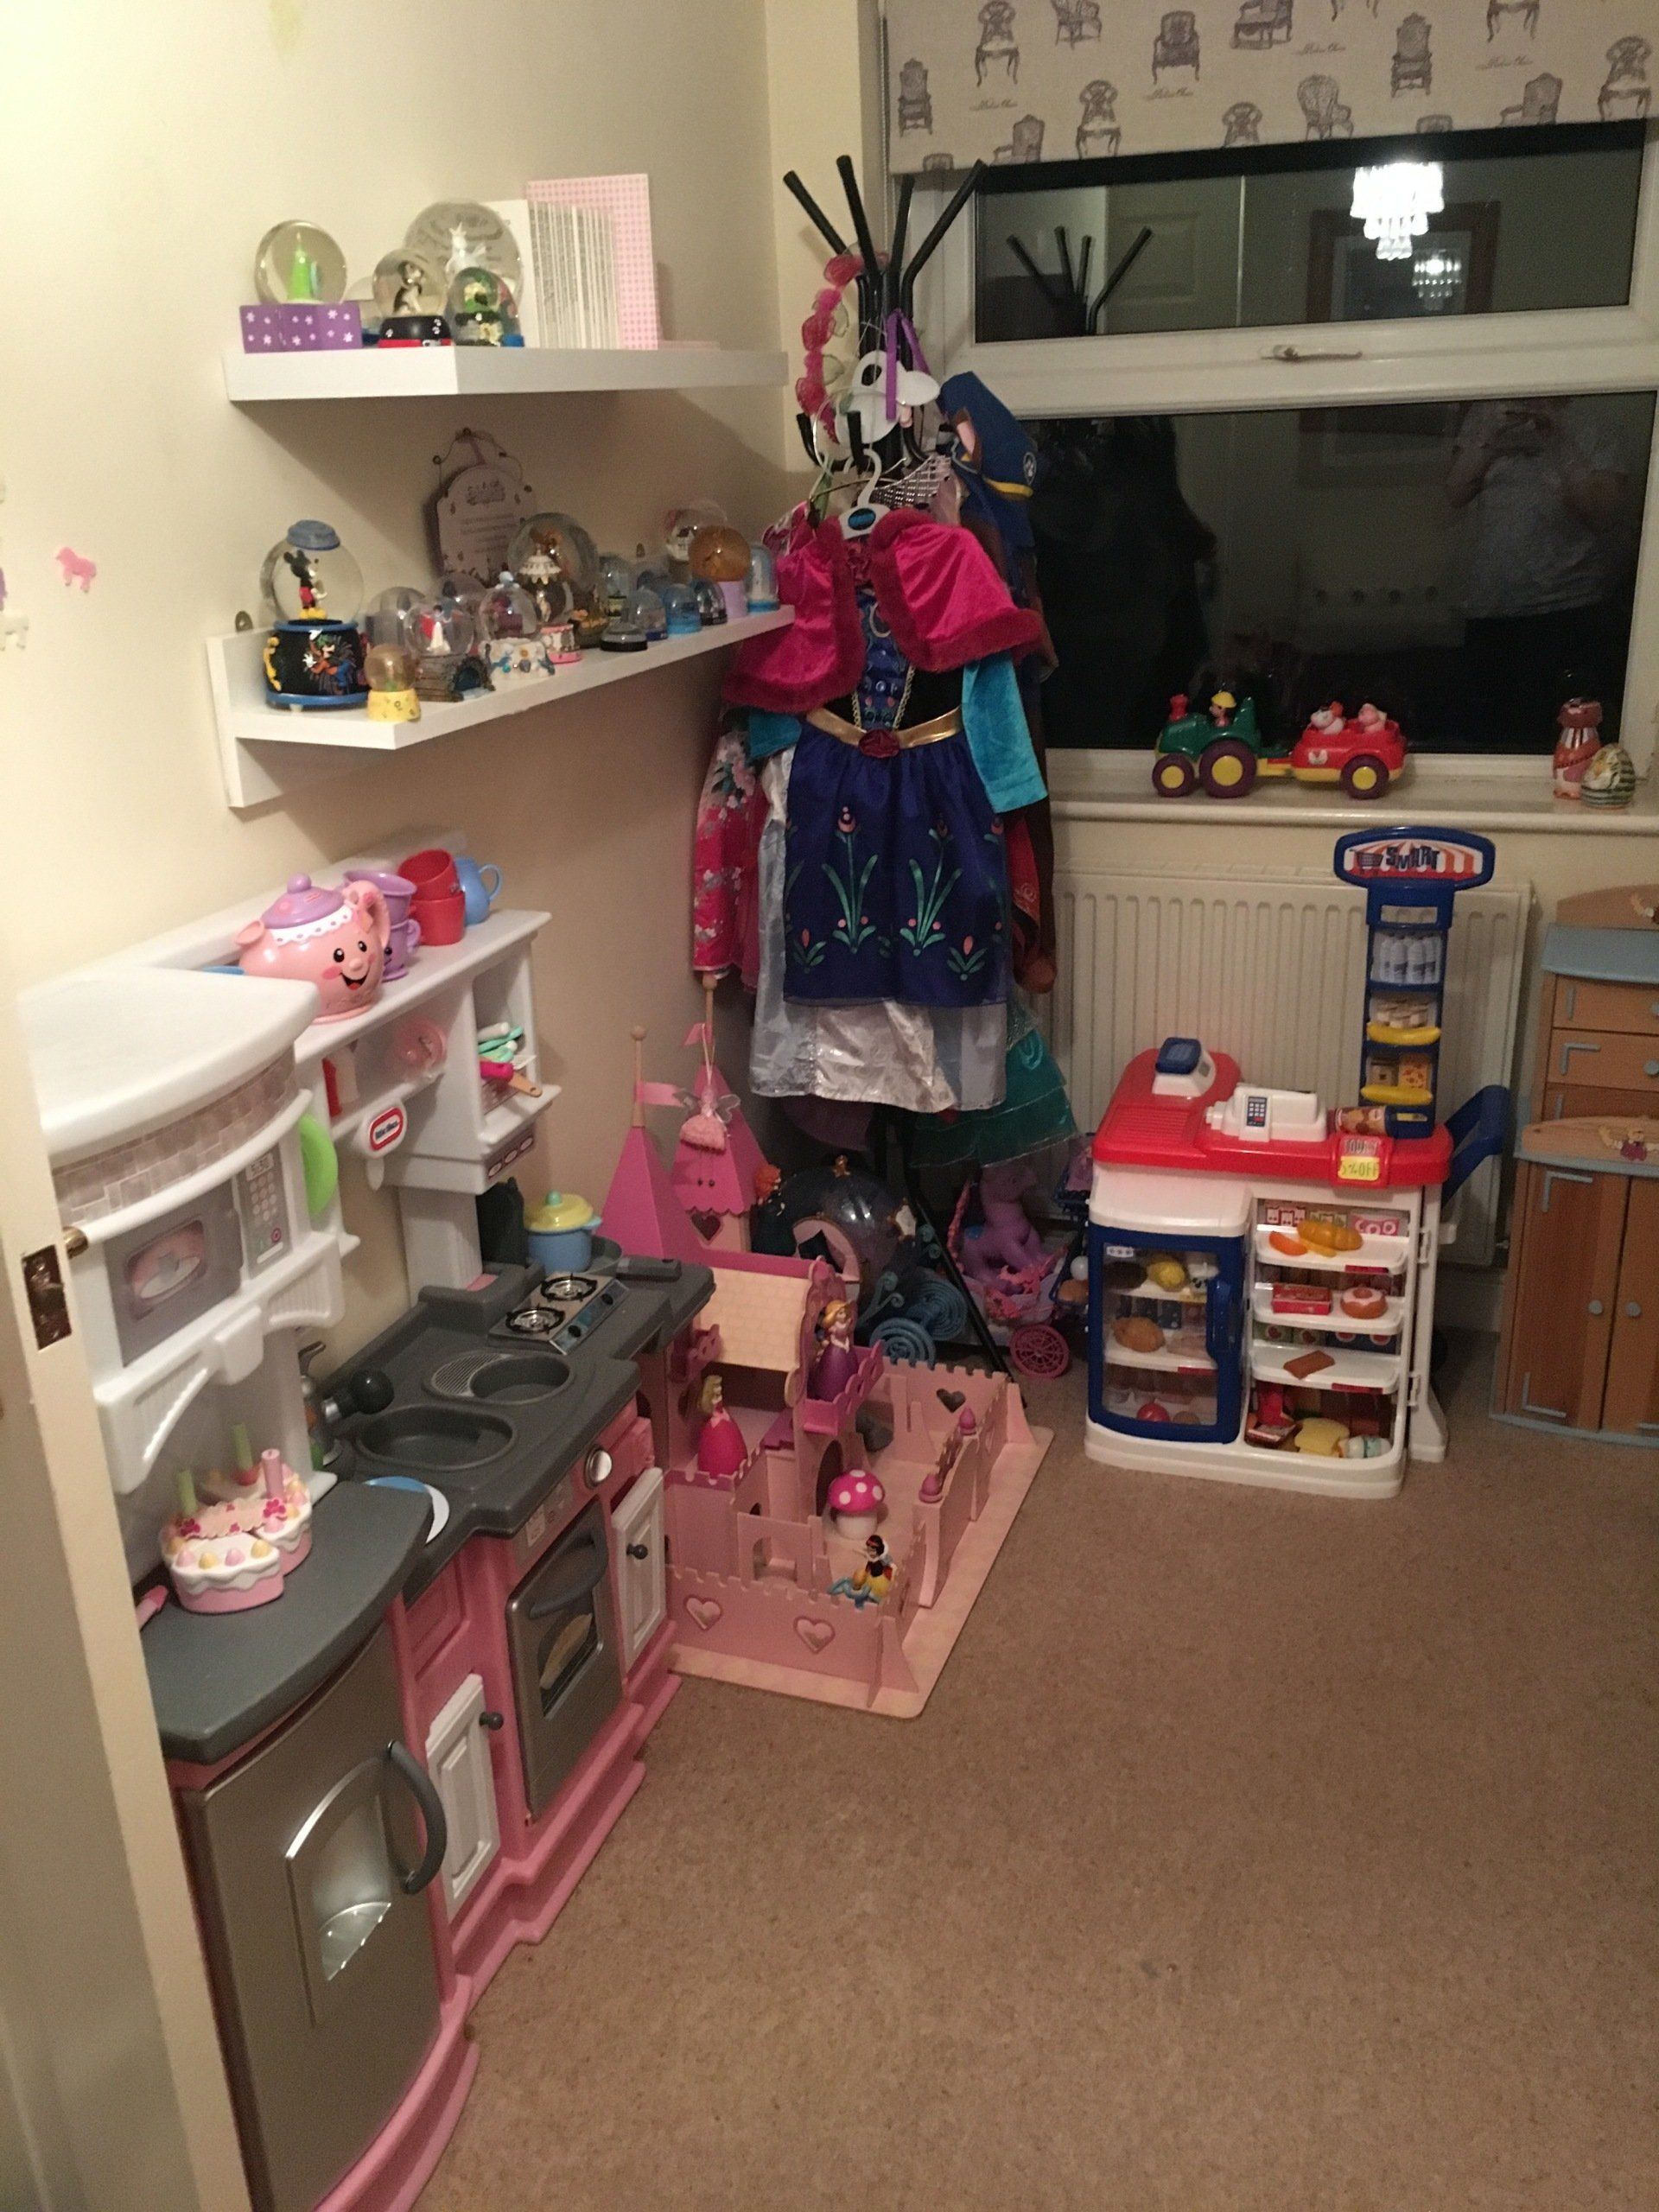 After the organising of the child's bedroom